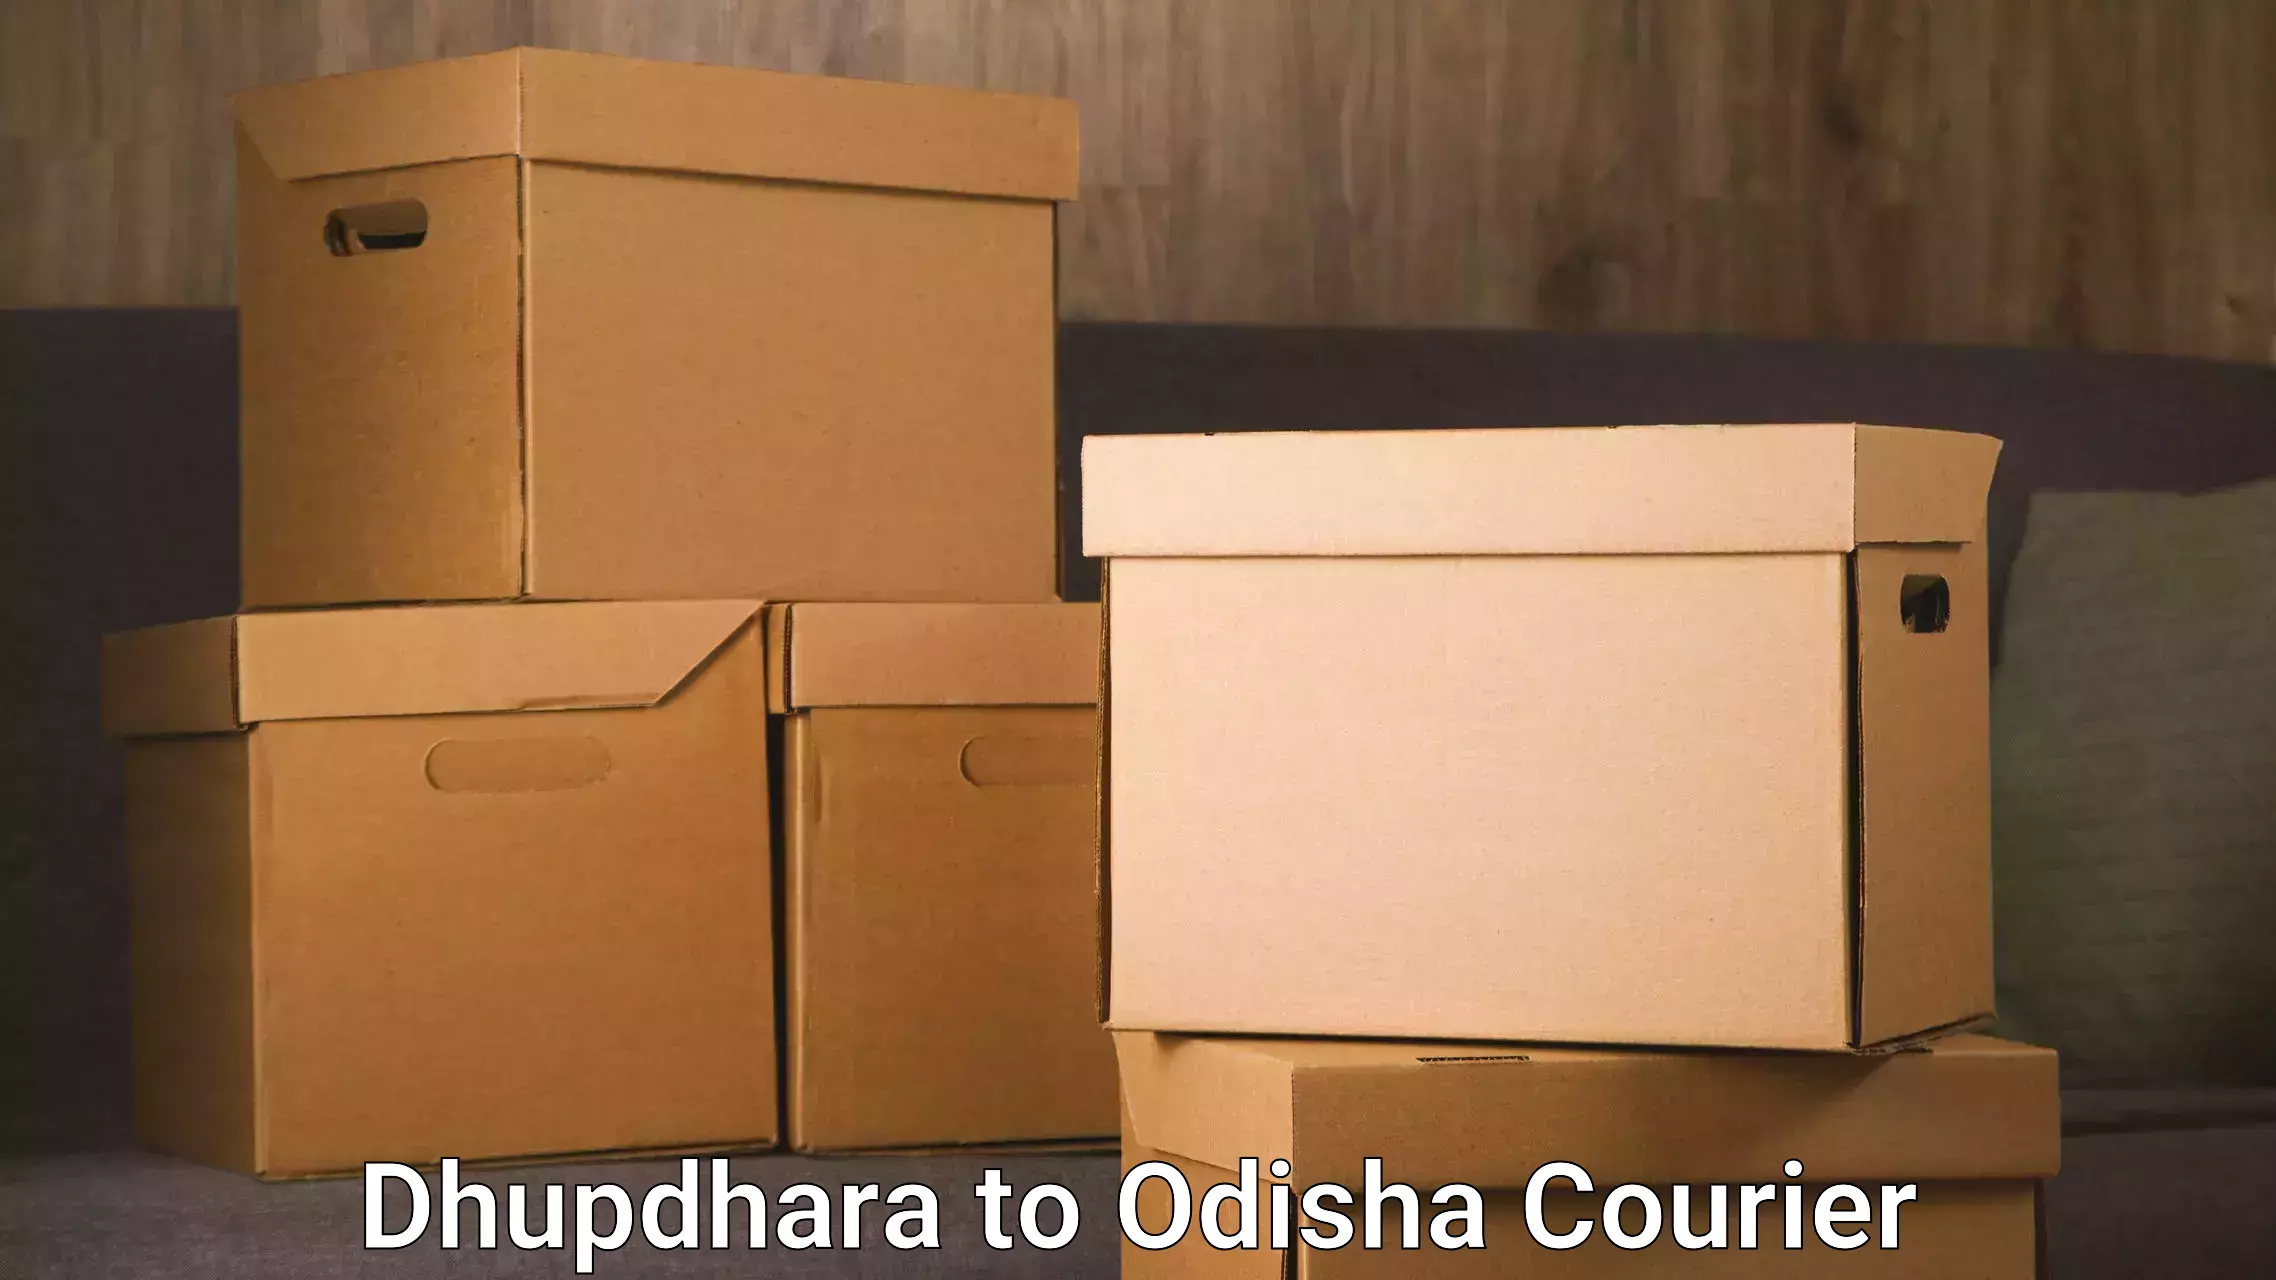 Reliable delivery network Dhupdhara to Binka